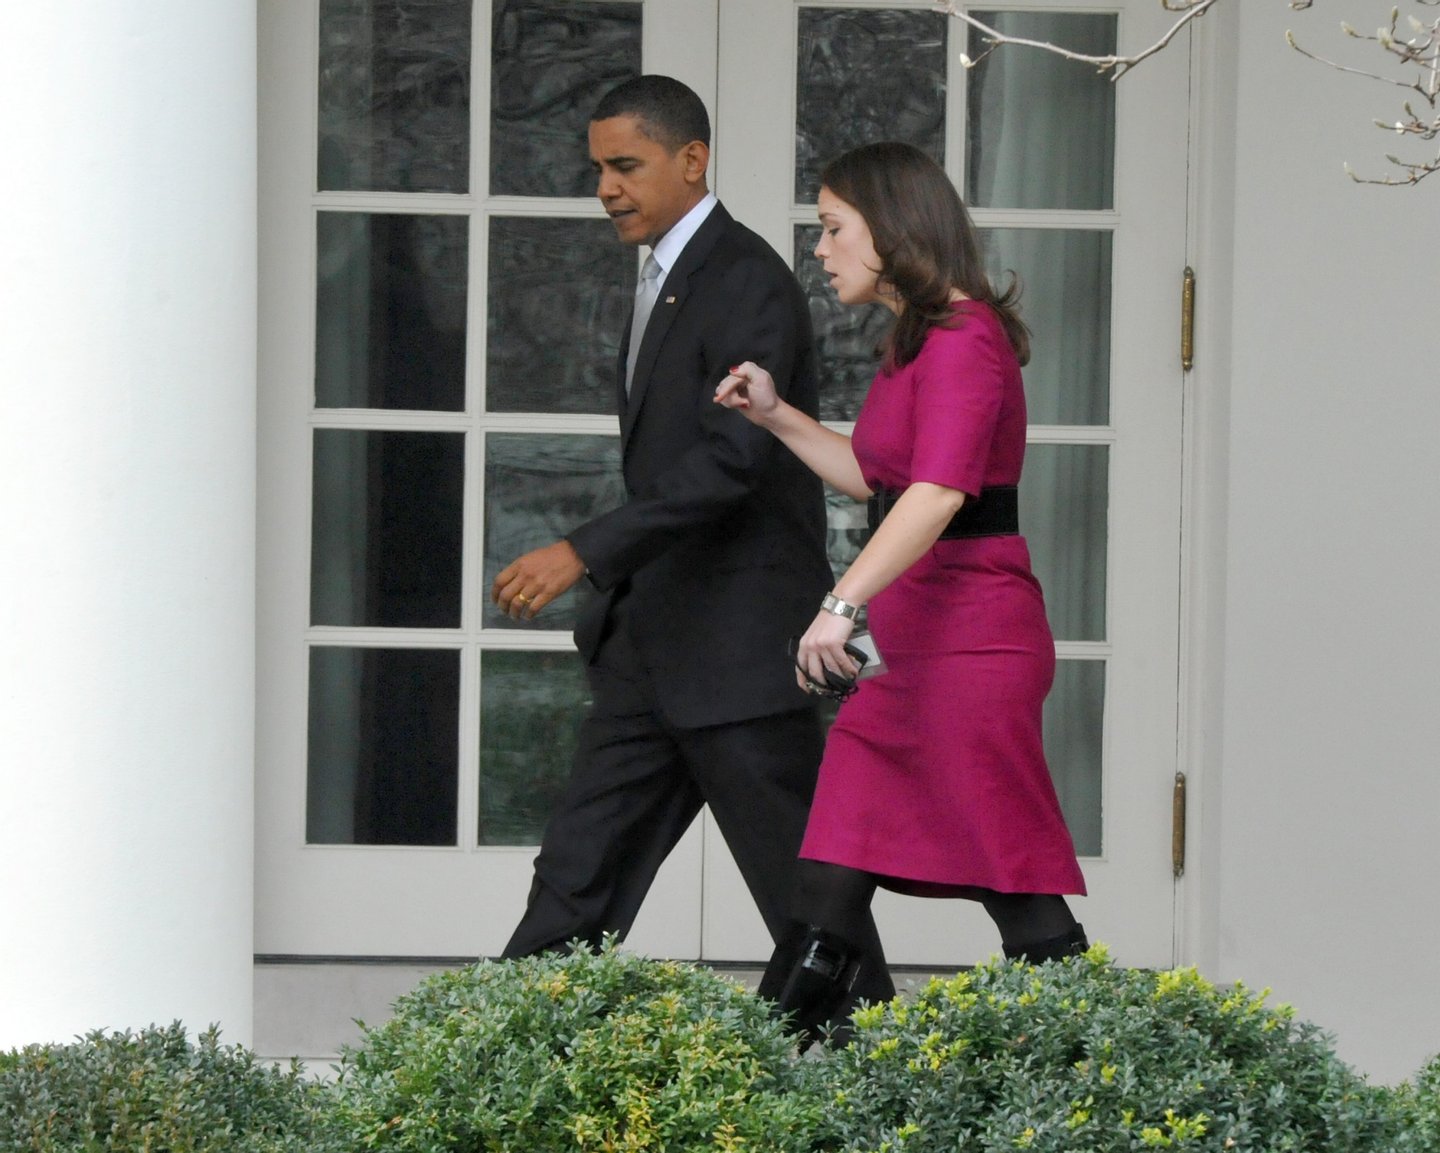 WASHINGTON - DECEMBER 15: U.S. President Barack Obama (L) walks on the Colonnade to the Oval Office walks on the Colonnade to the Oval Office with his personal secretary Katie Johnson after he returned to the White House from an appearance at a Home Depot December 15, 2009 in Alexandria, Virginia. Obama is imploring congress to pass new homeowner incentives to make their homes more energy efficient. (Photo by Ron Sachs-Pool/Getty Images)